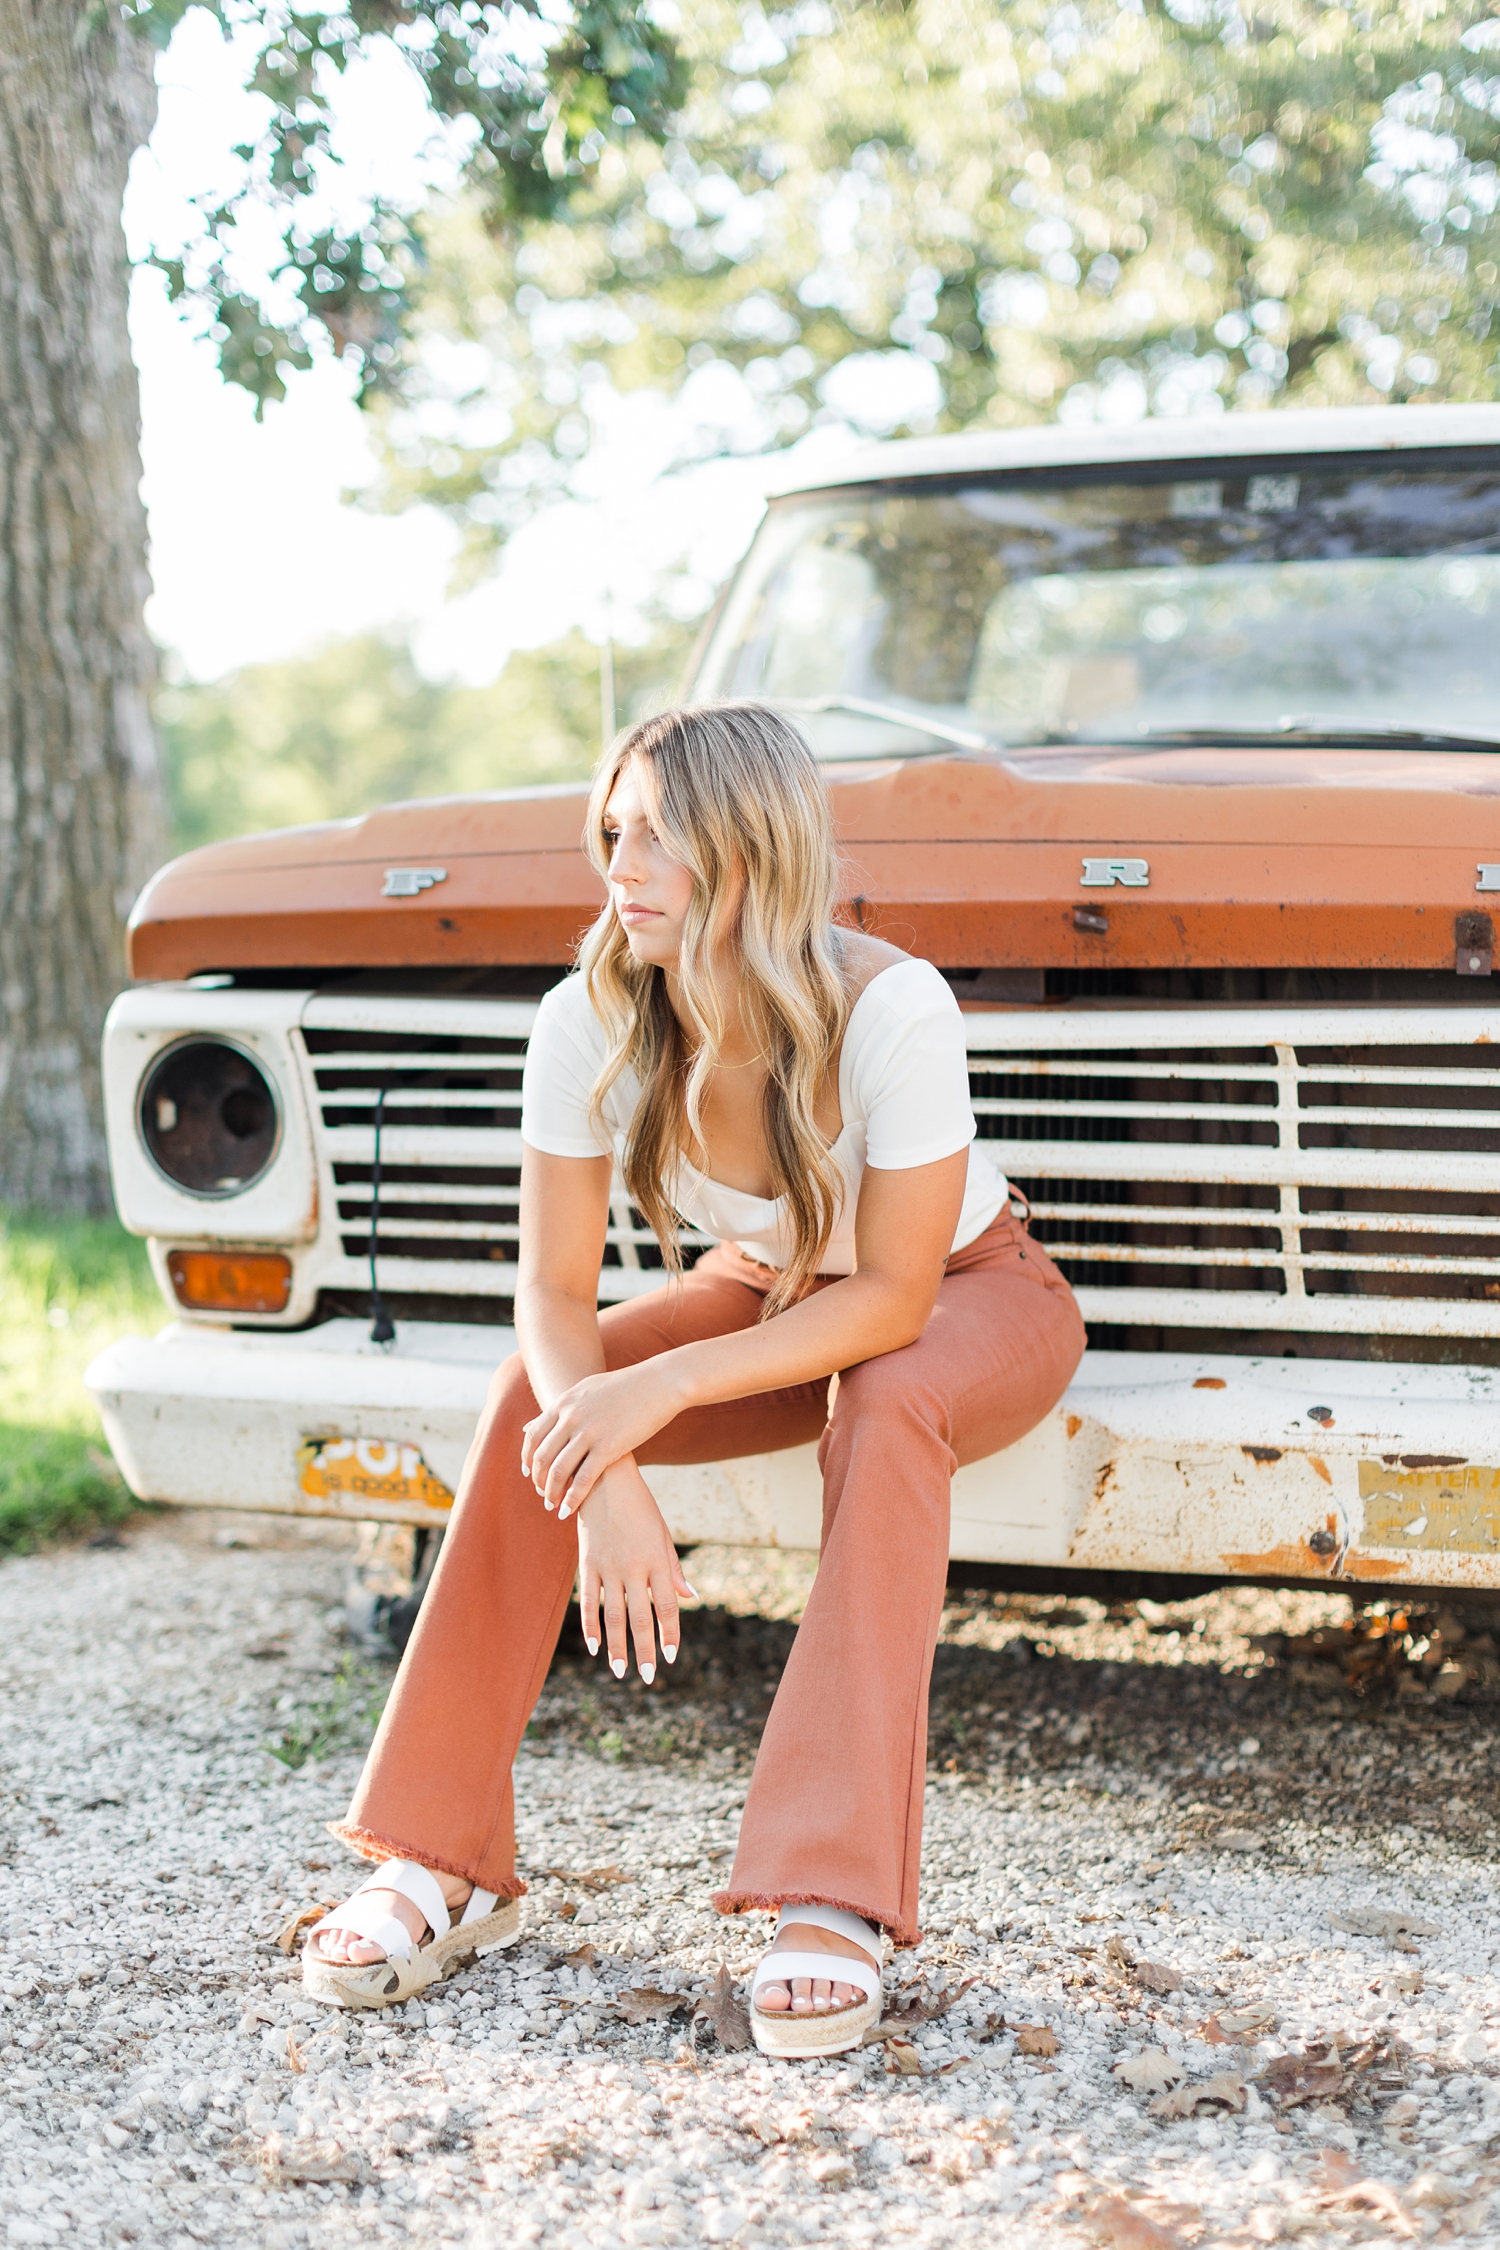 Eden, wearing burnt orange bell bottoms, sits on the front bumper of a 1970's Ford truck | CB Studio